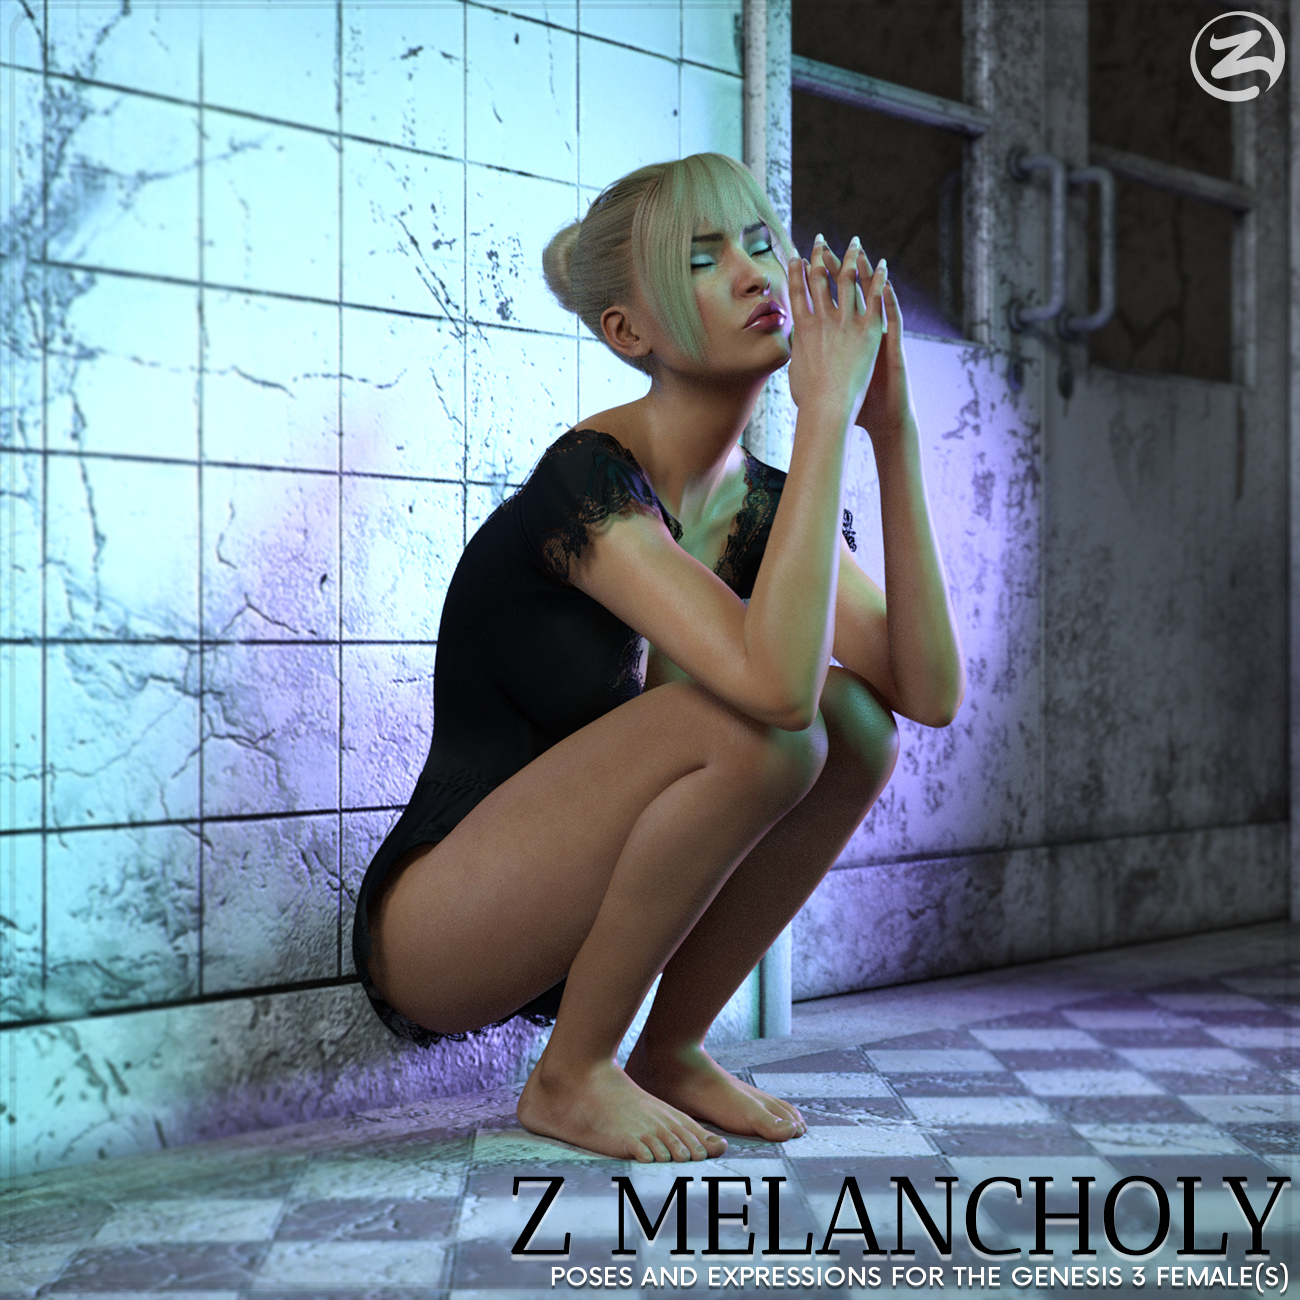 Z Melancholy - Poses and Expressions for the Genesis 3 Female(s)